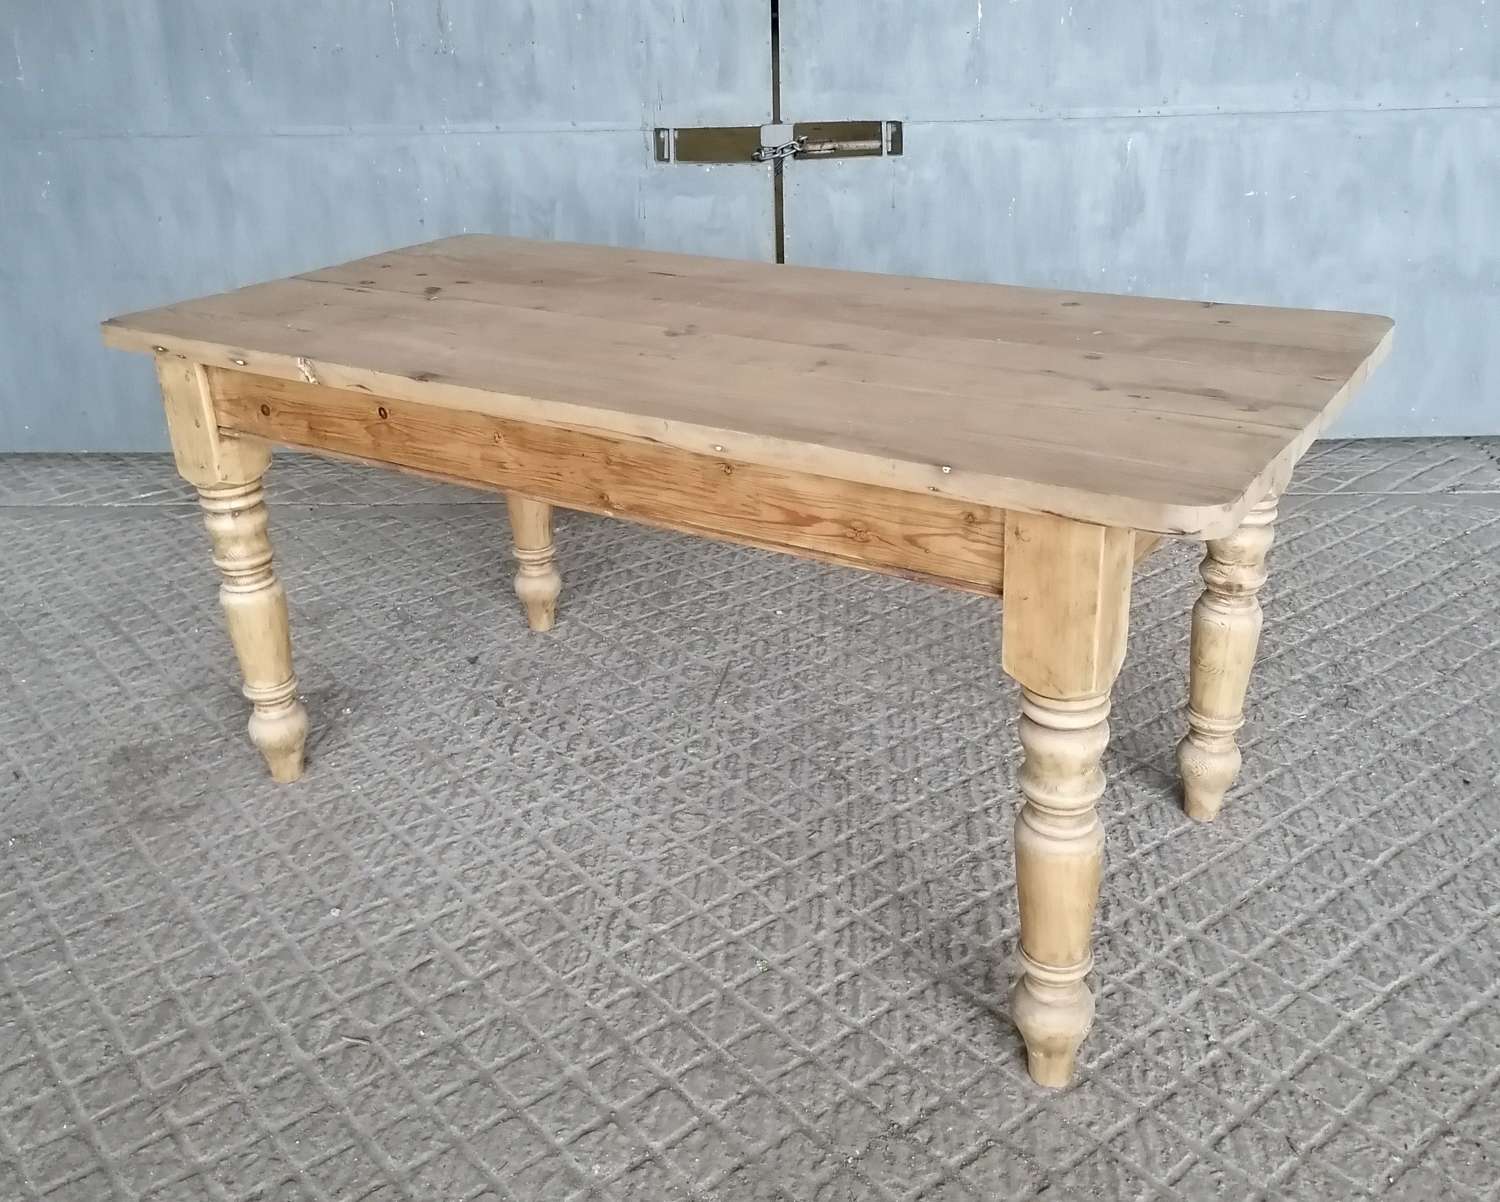 M1447 RECLAIMED STRIPPED PINE FARMHOUSE TABLE 4-6 SEATER